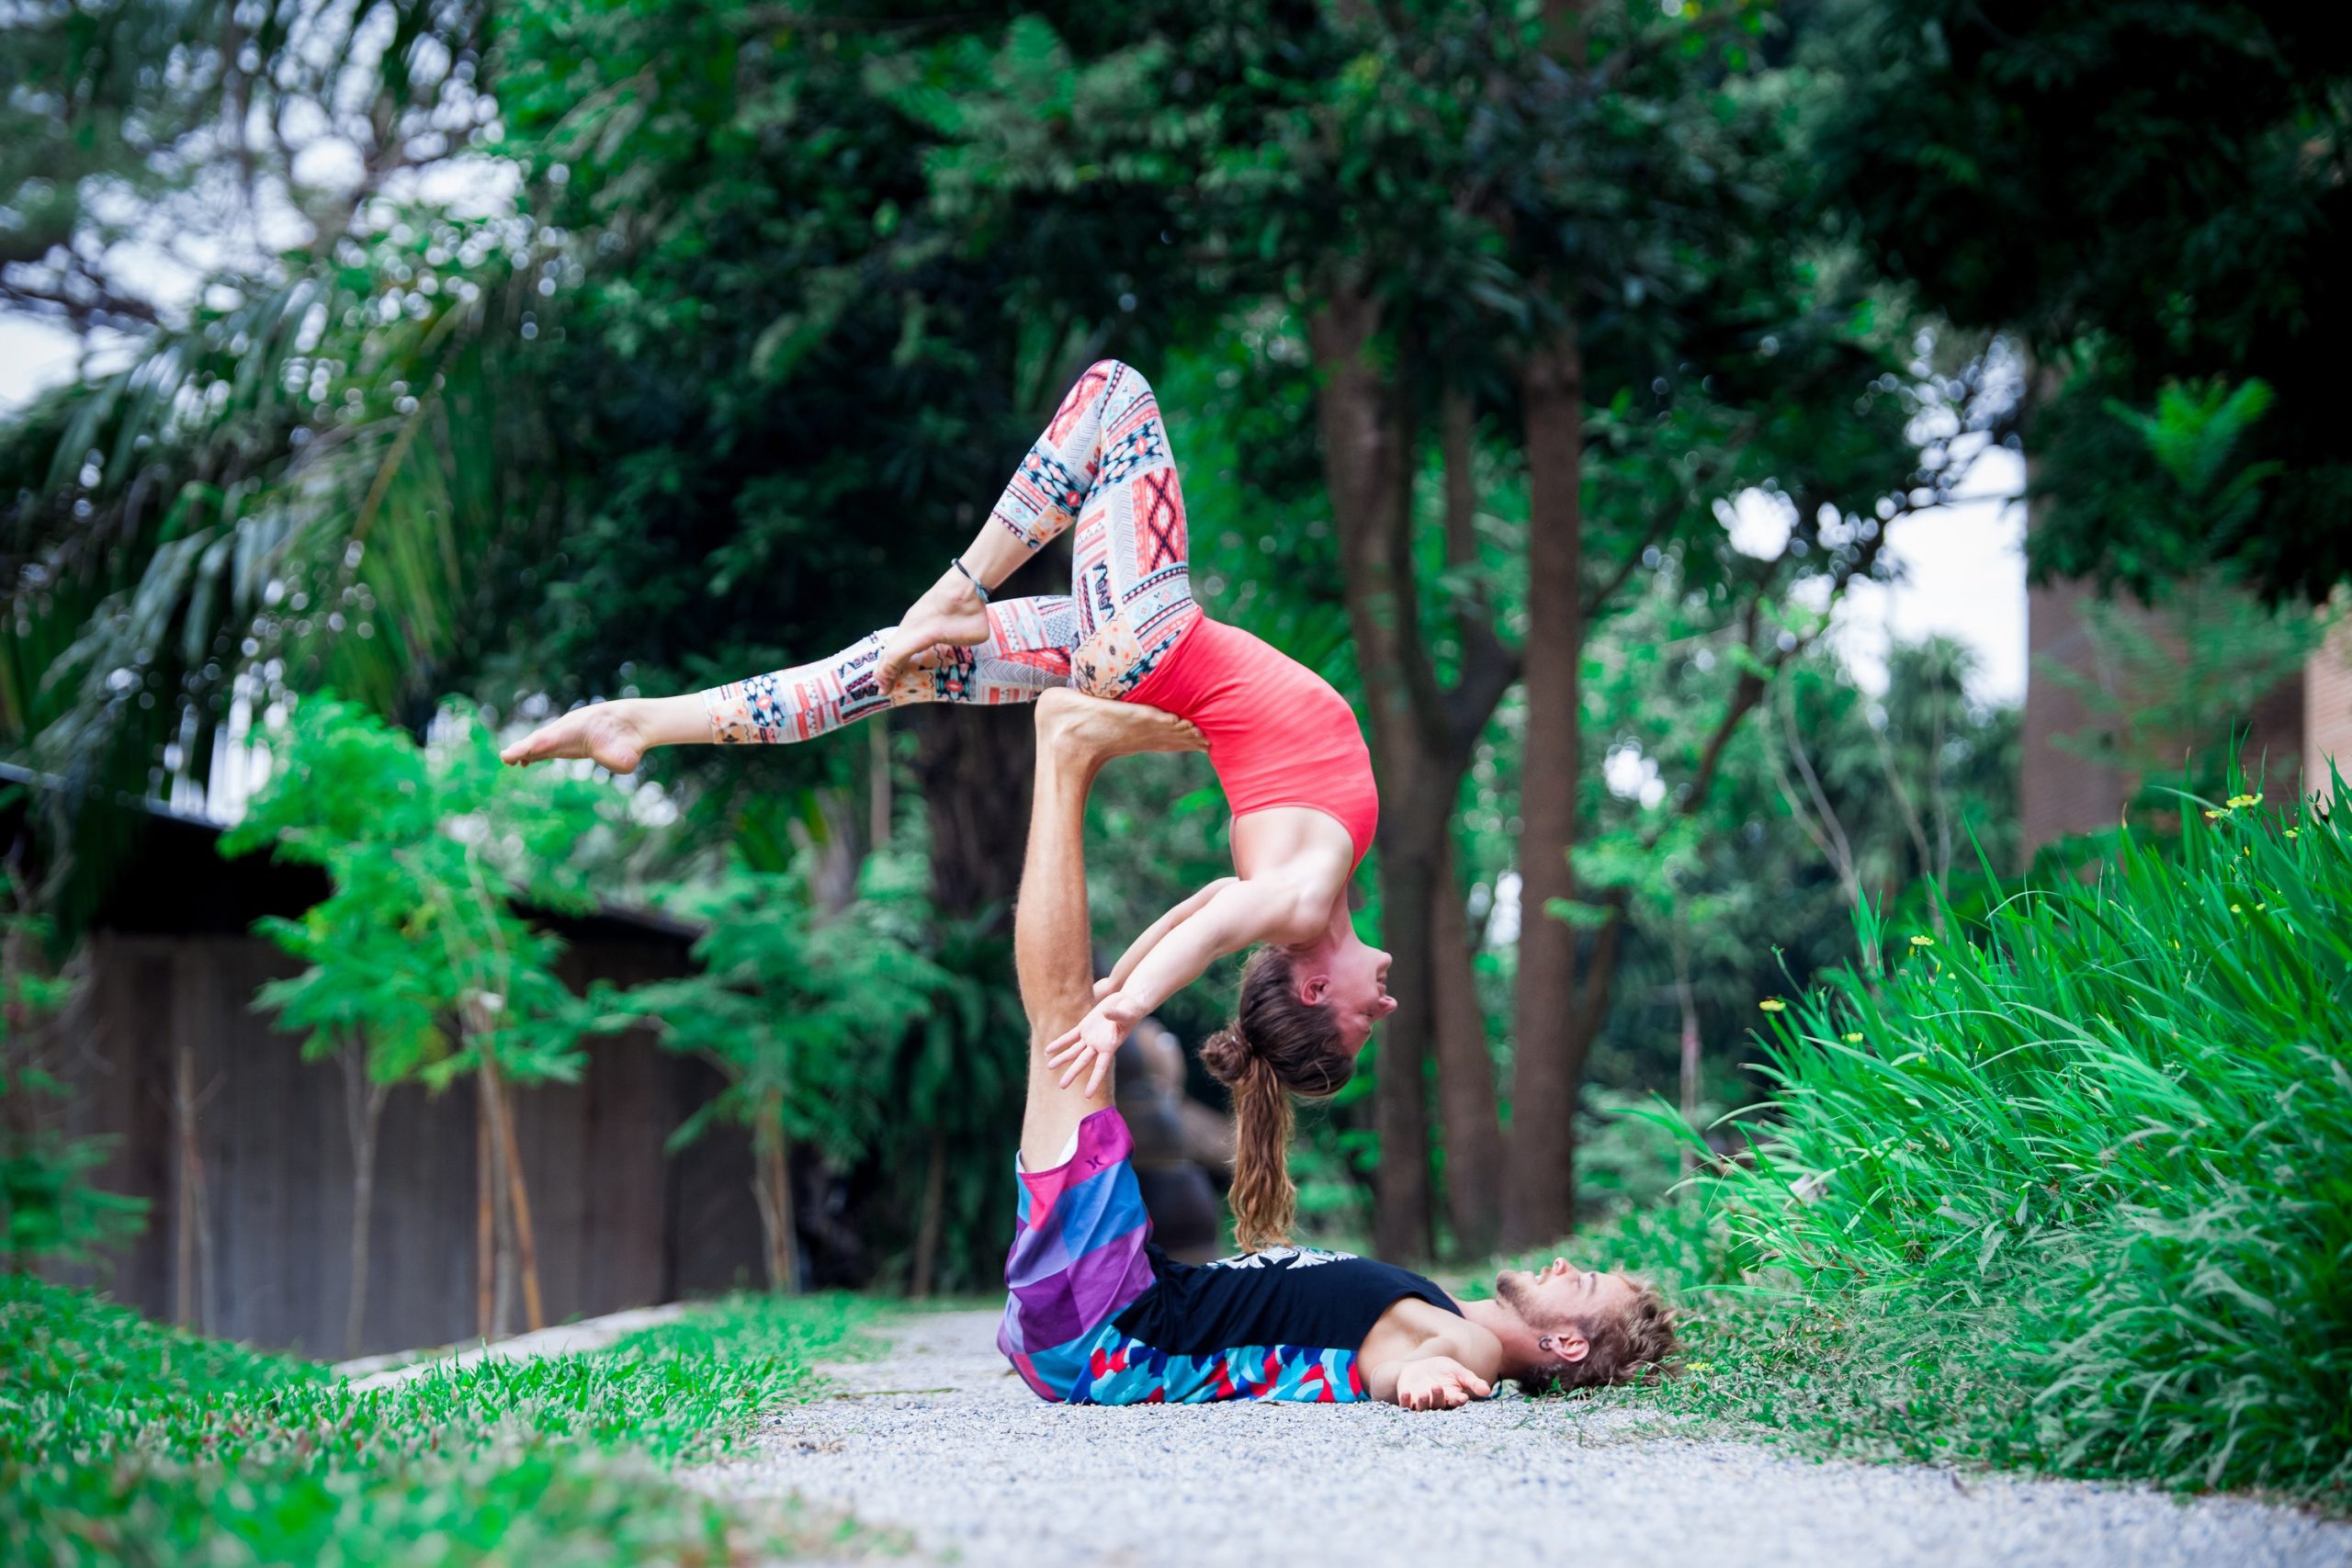 Emily and Gabe in an acro posture doing acroyoga